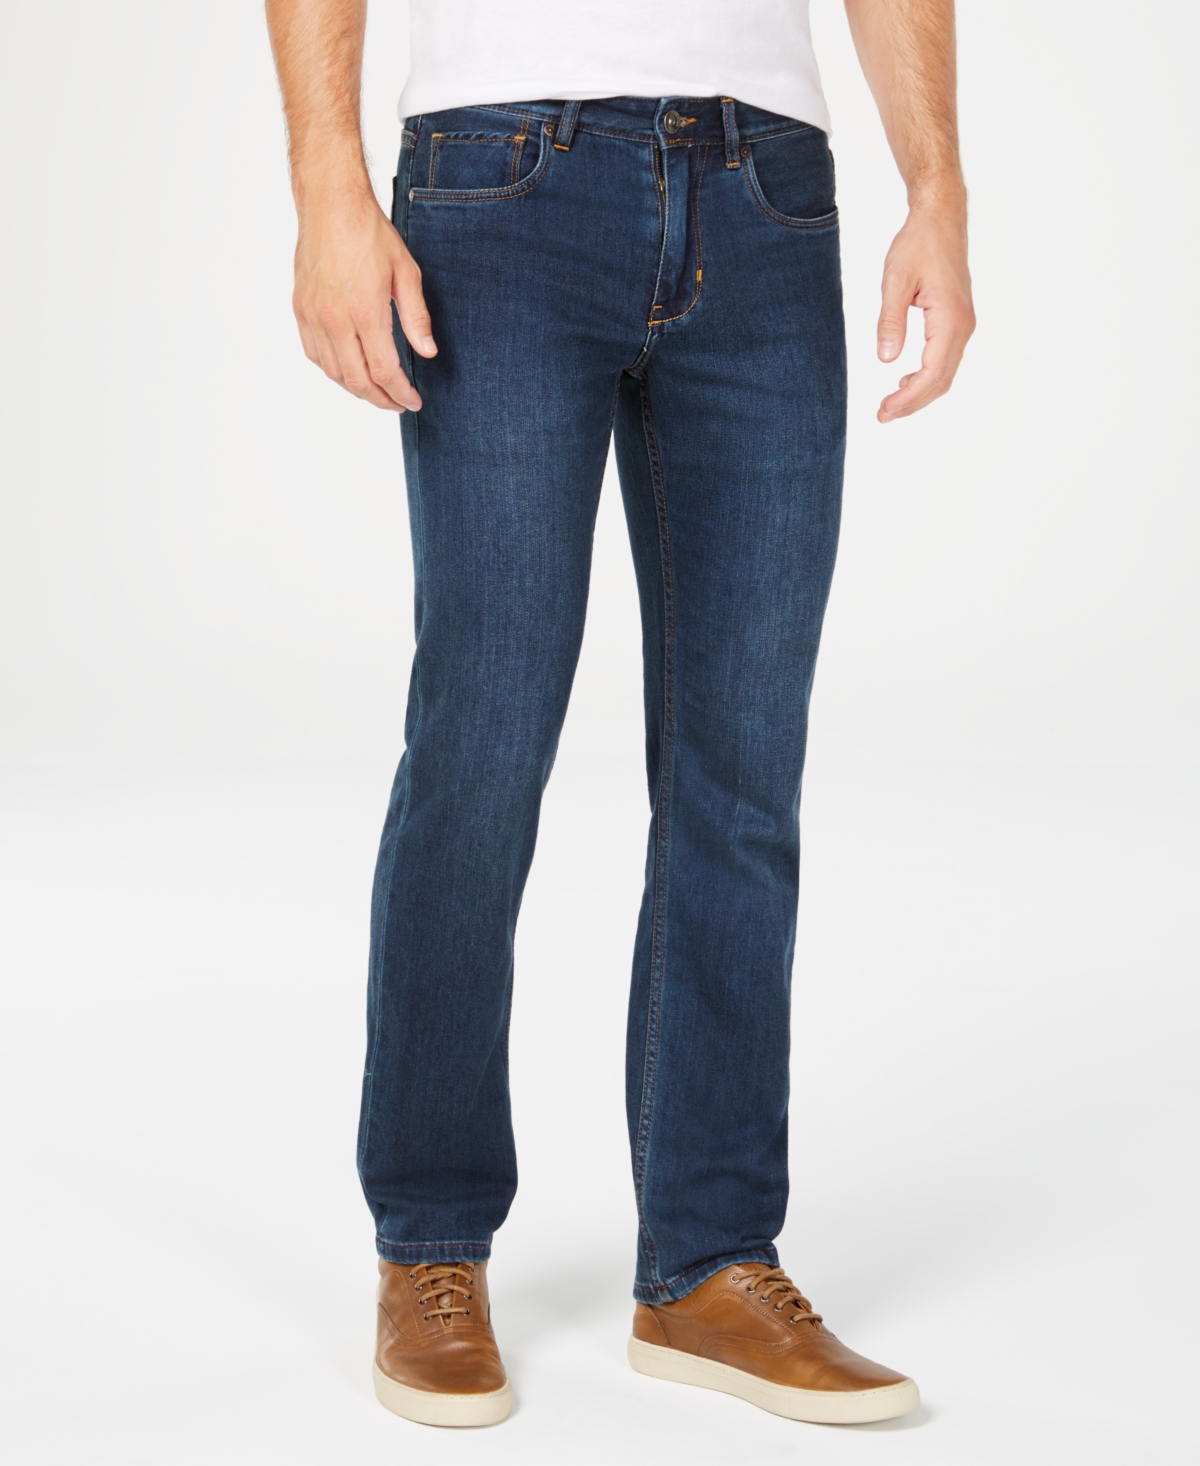 UPC 719260342576 product image for Tommy Bahama Men's Antigua Cove Authentic Fit Jeans | upcitemdb.com